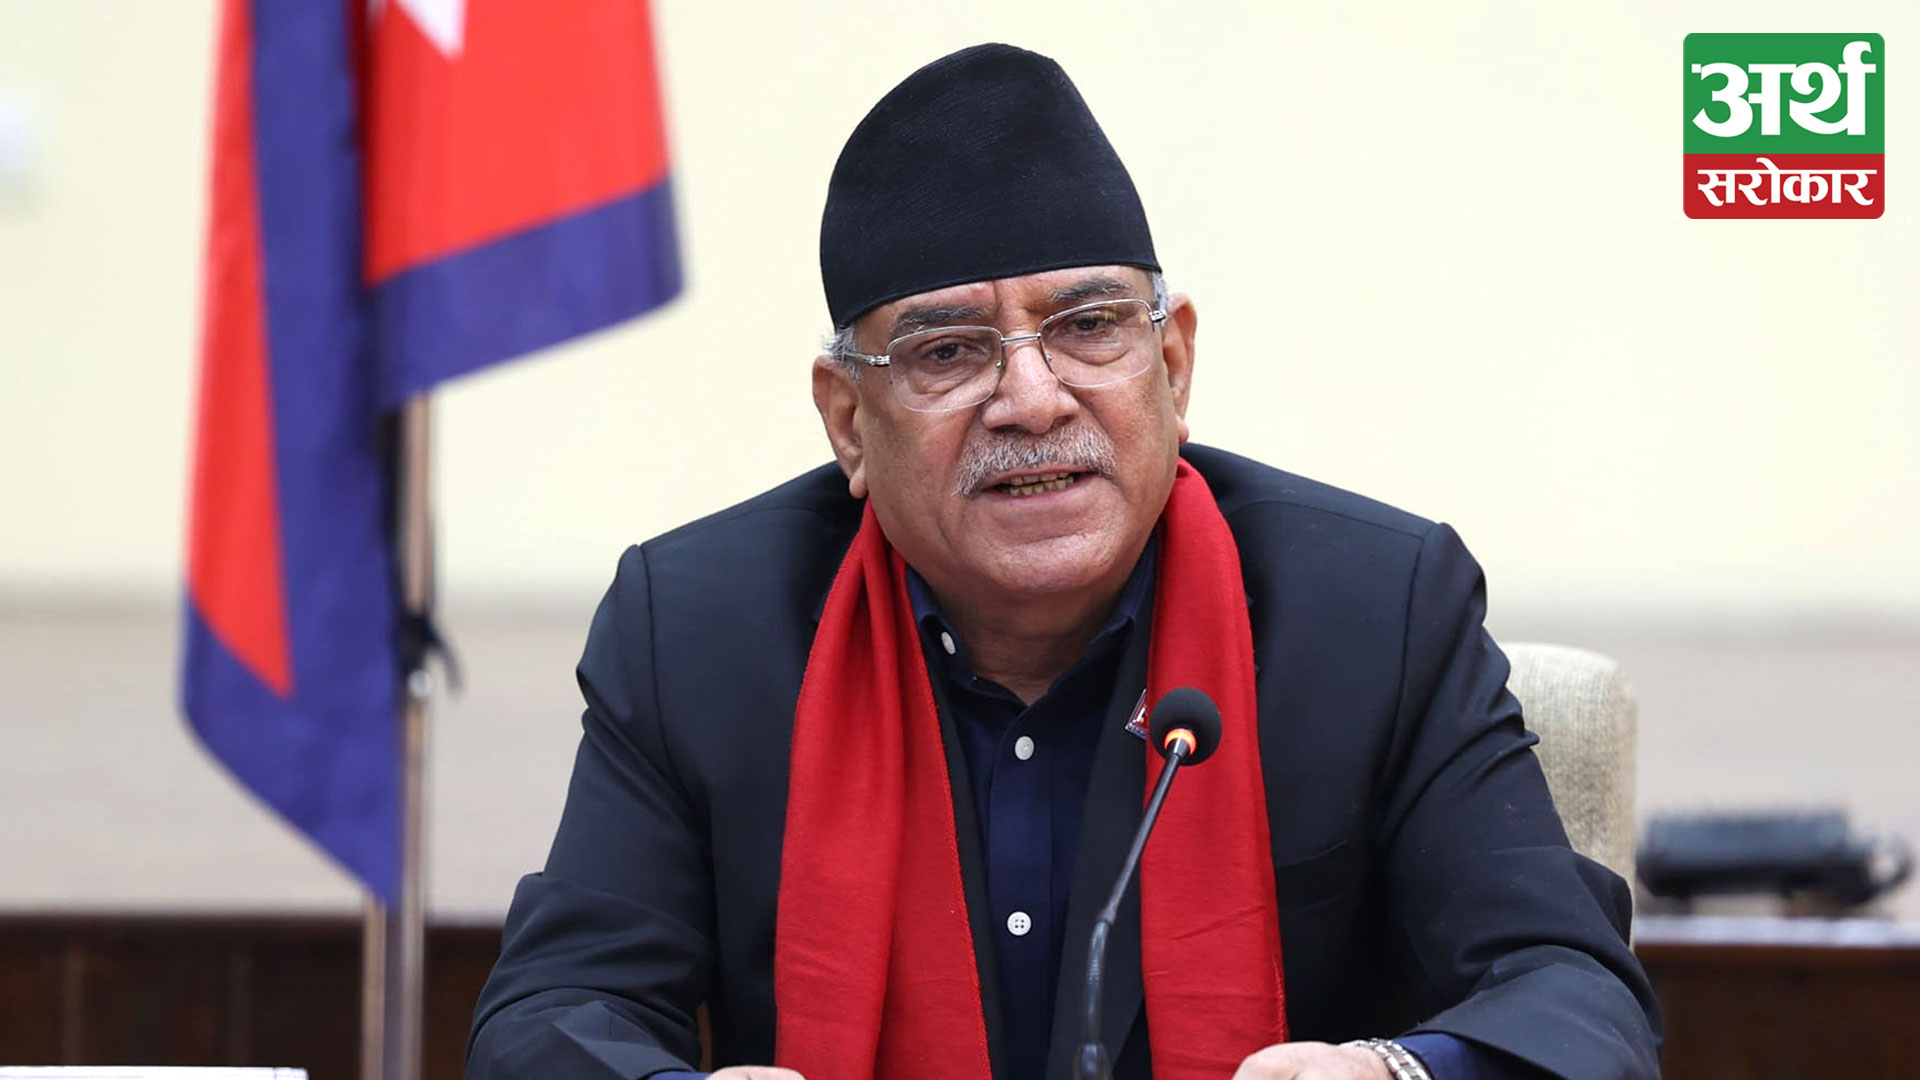 PM Dahal presses for developing country as hub for higher education